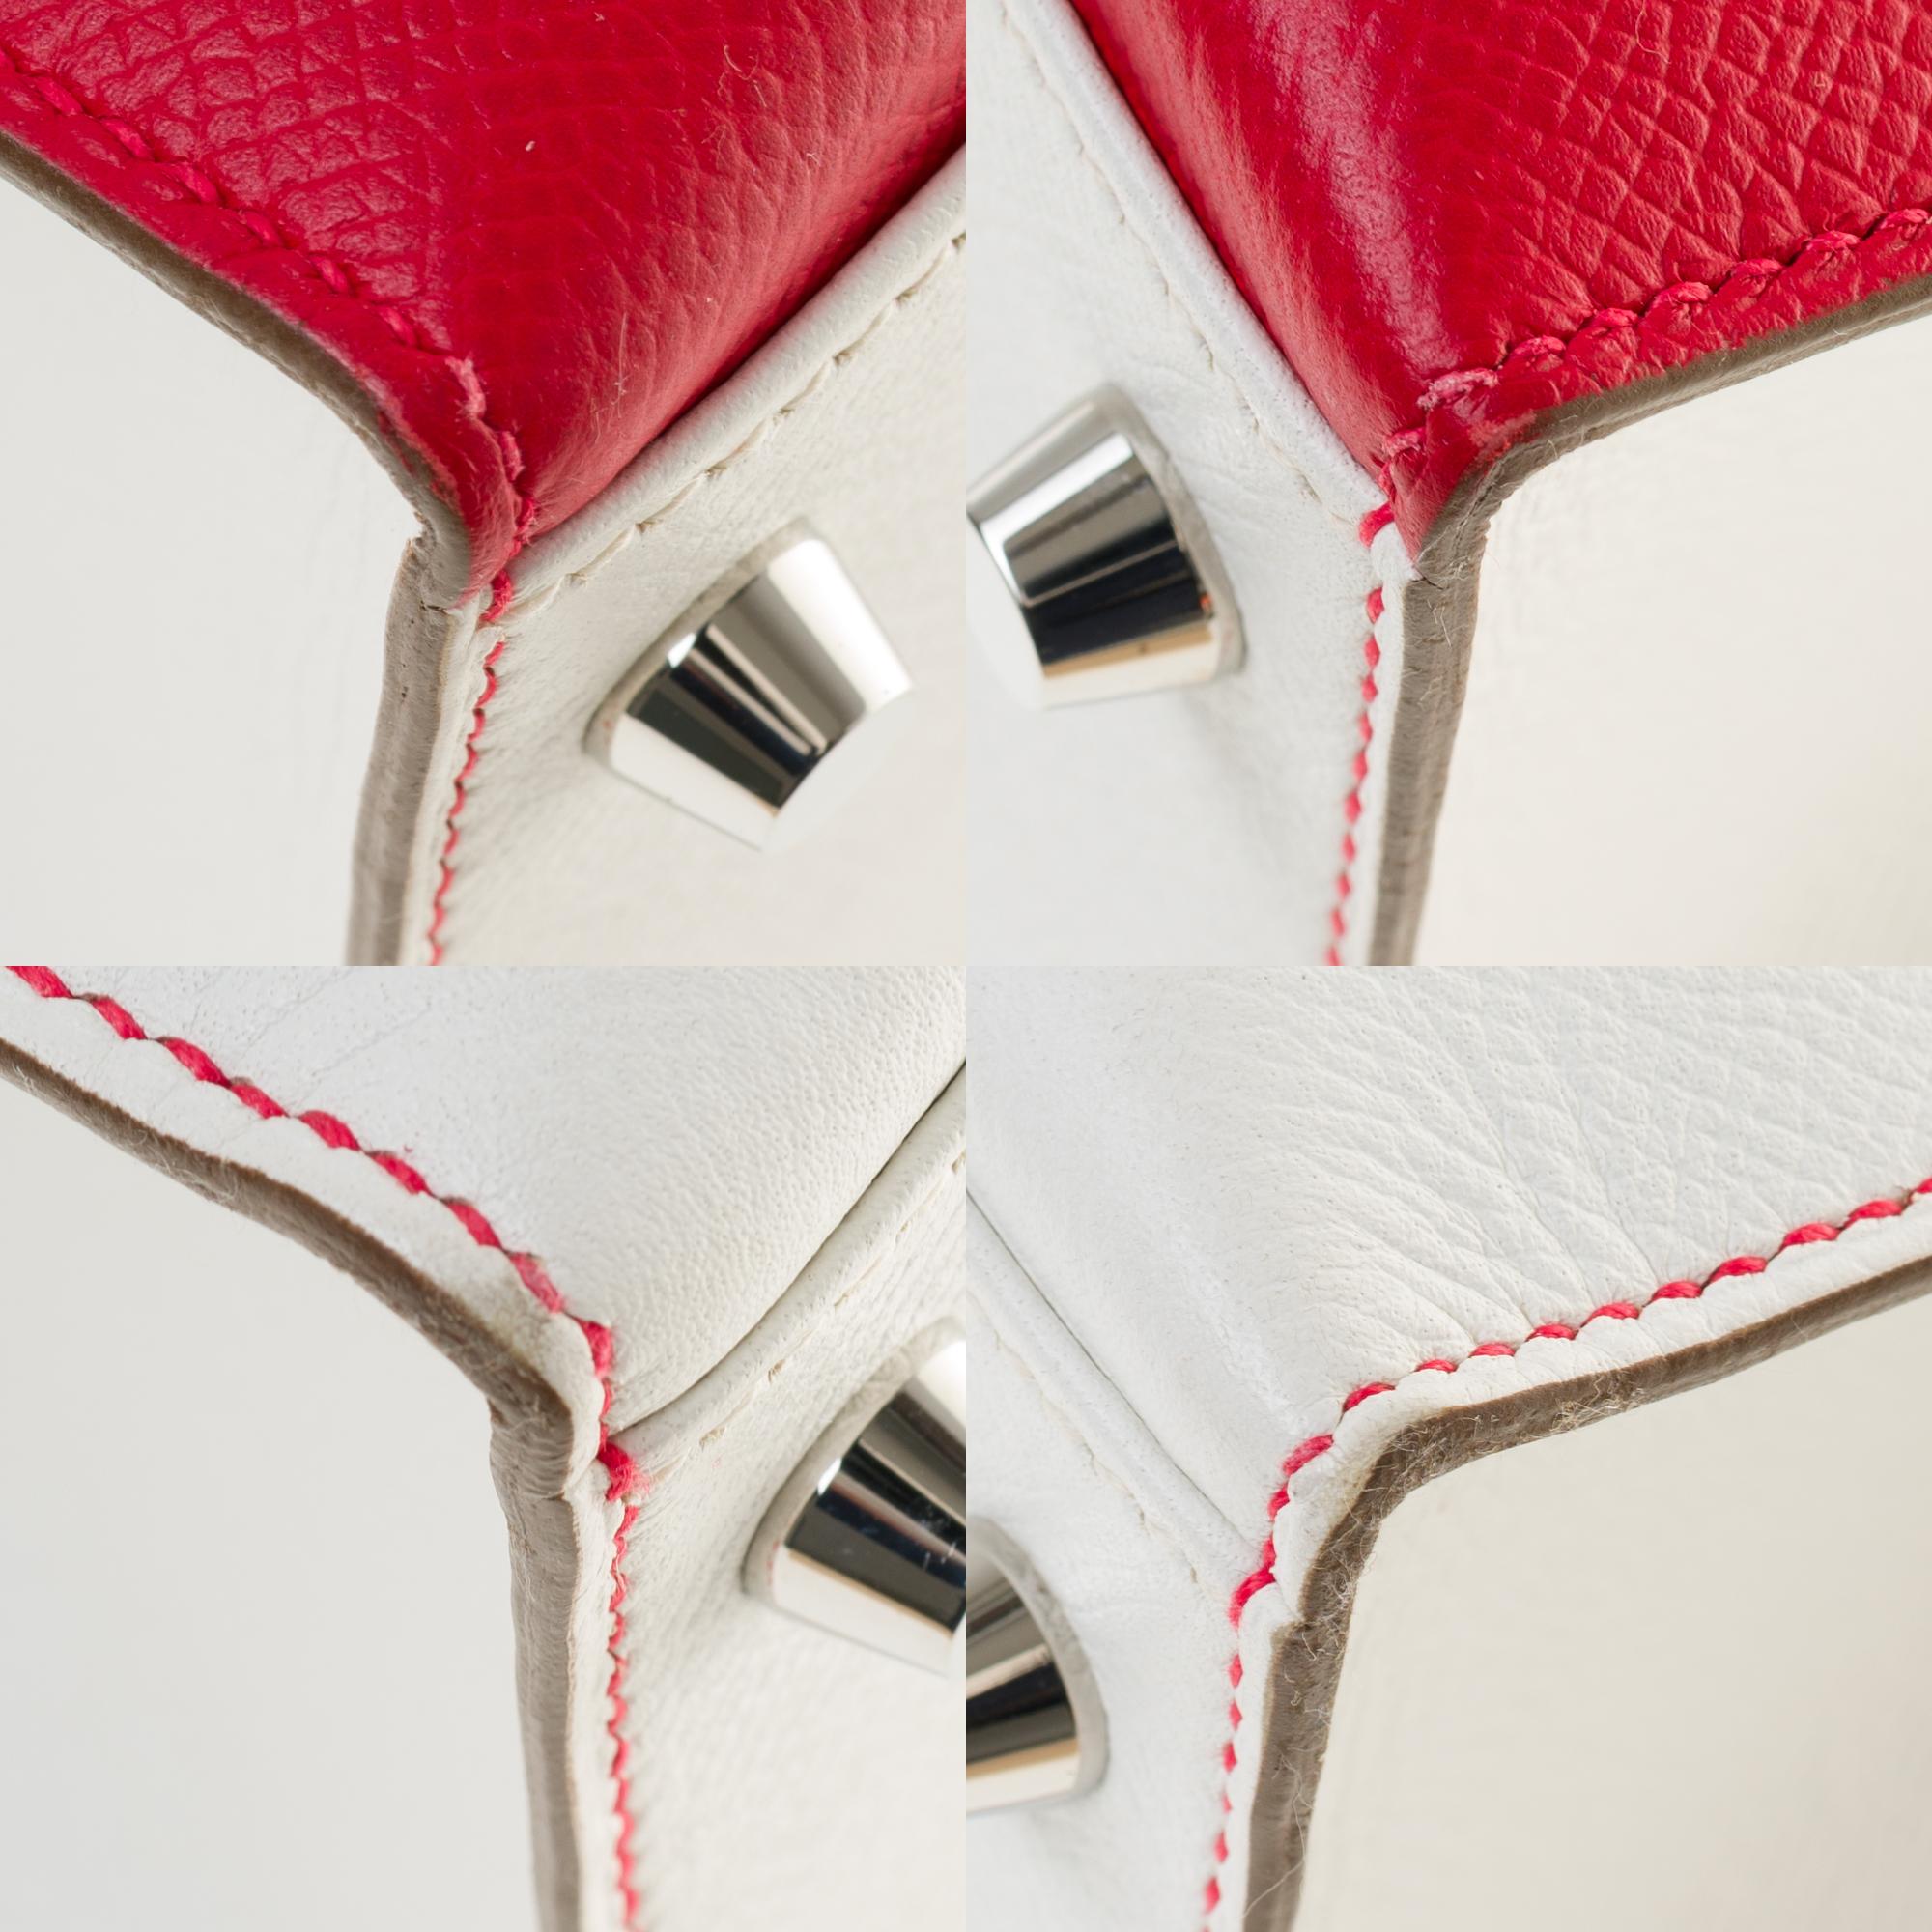 ULTRA RARE-COLLECTIBLE-Hermès Kelly 32 Flag strap in red and white epsom, PHW 4